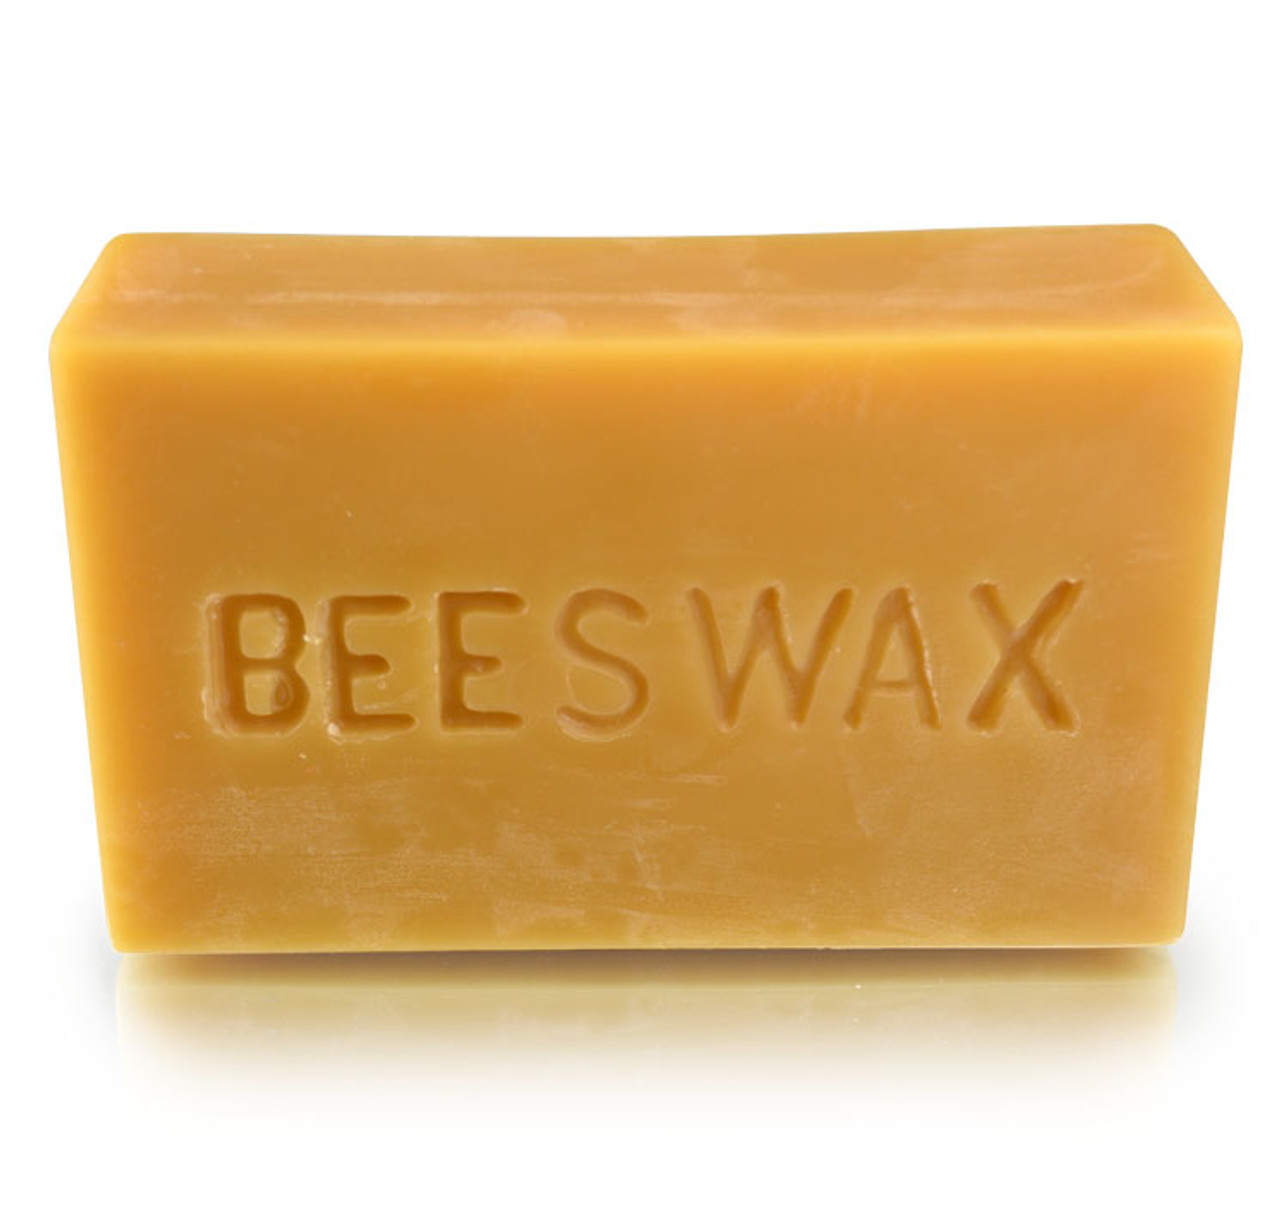 1 Pound Pure Beeswax Bar